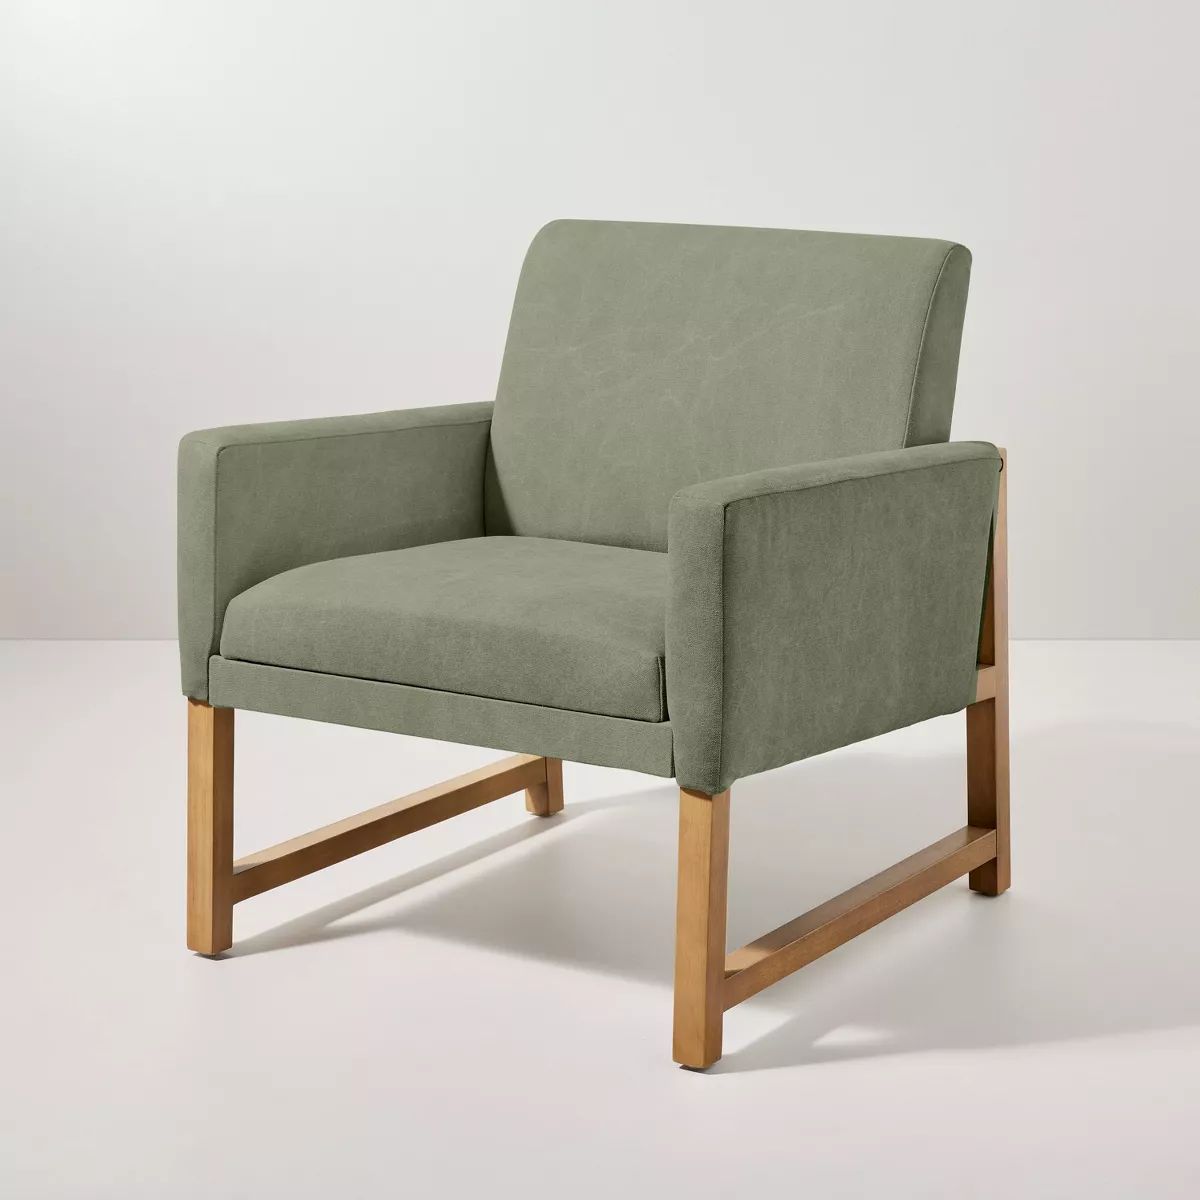 Canvas Upholstered Accent Arm Chair - Olive/Khaki - Hearth & Hand™ with Magnolia | Target